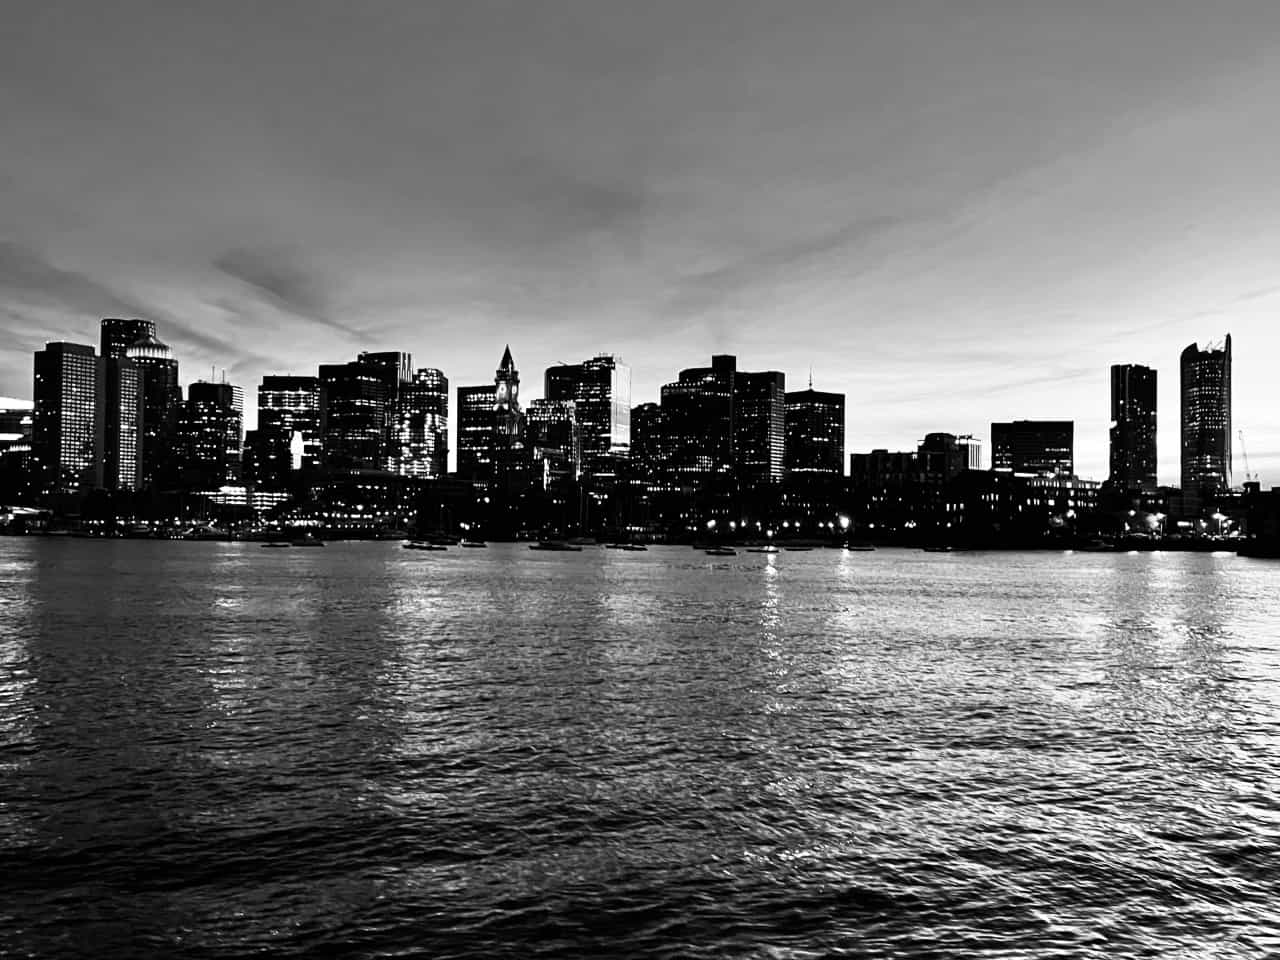 A black and white image of a City Skyline with a body of water in the foreground.